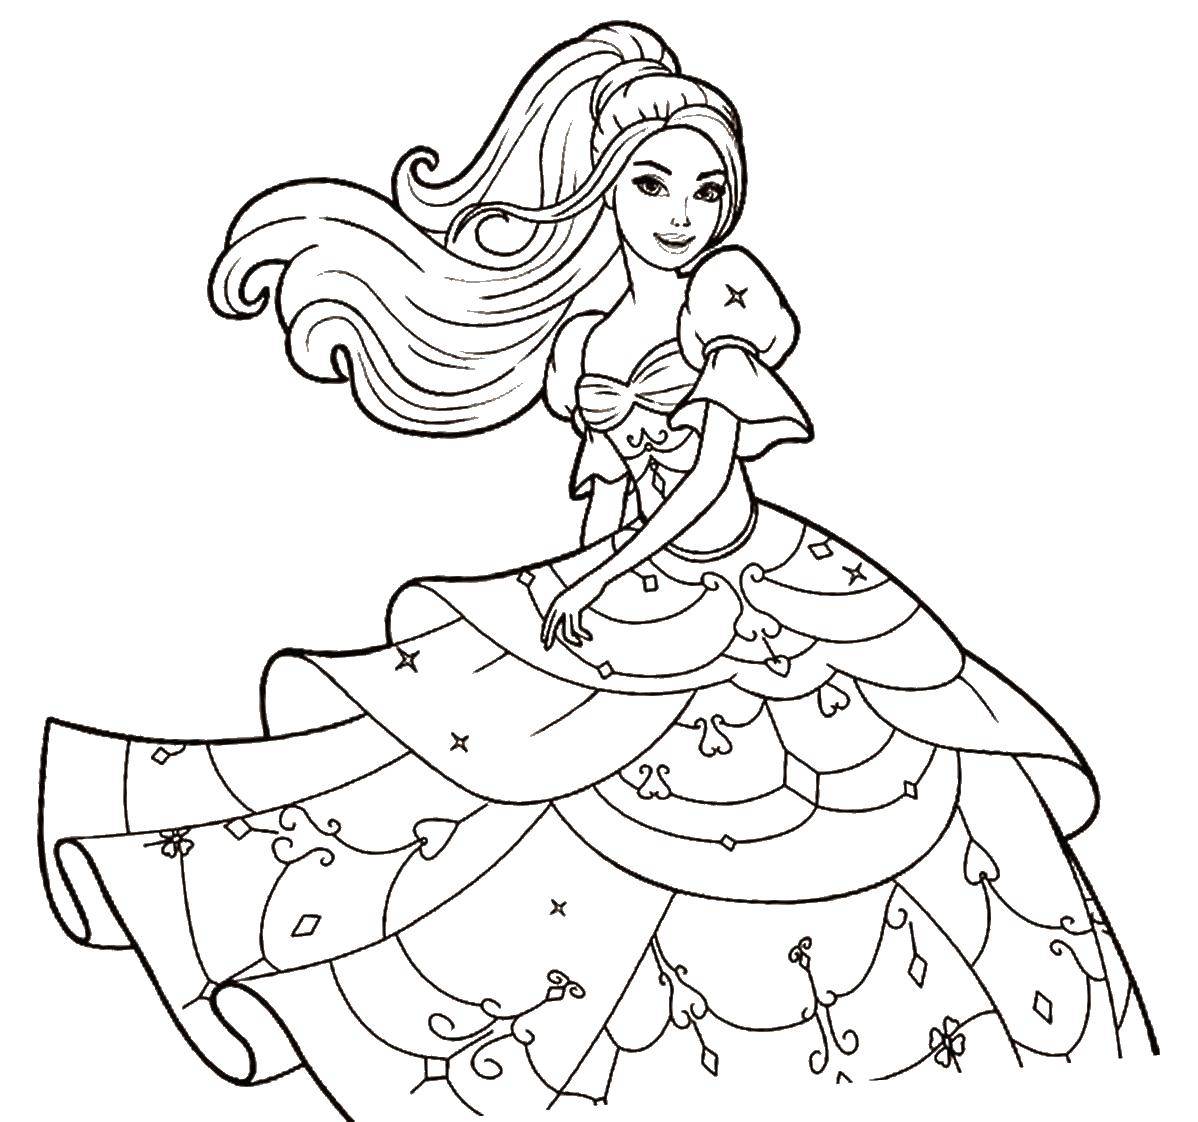 Coloring Barbie in evening dress. Category Barbie . Tags:  Barbie , girl, dress, doll.